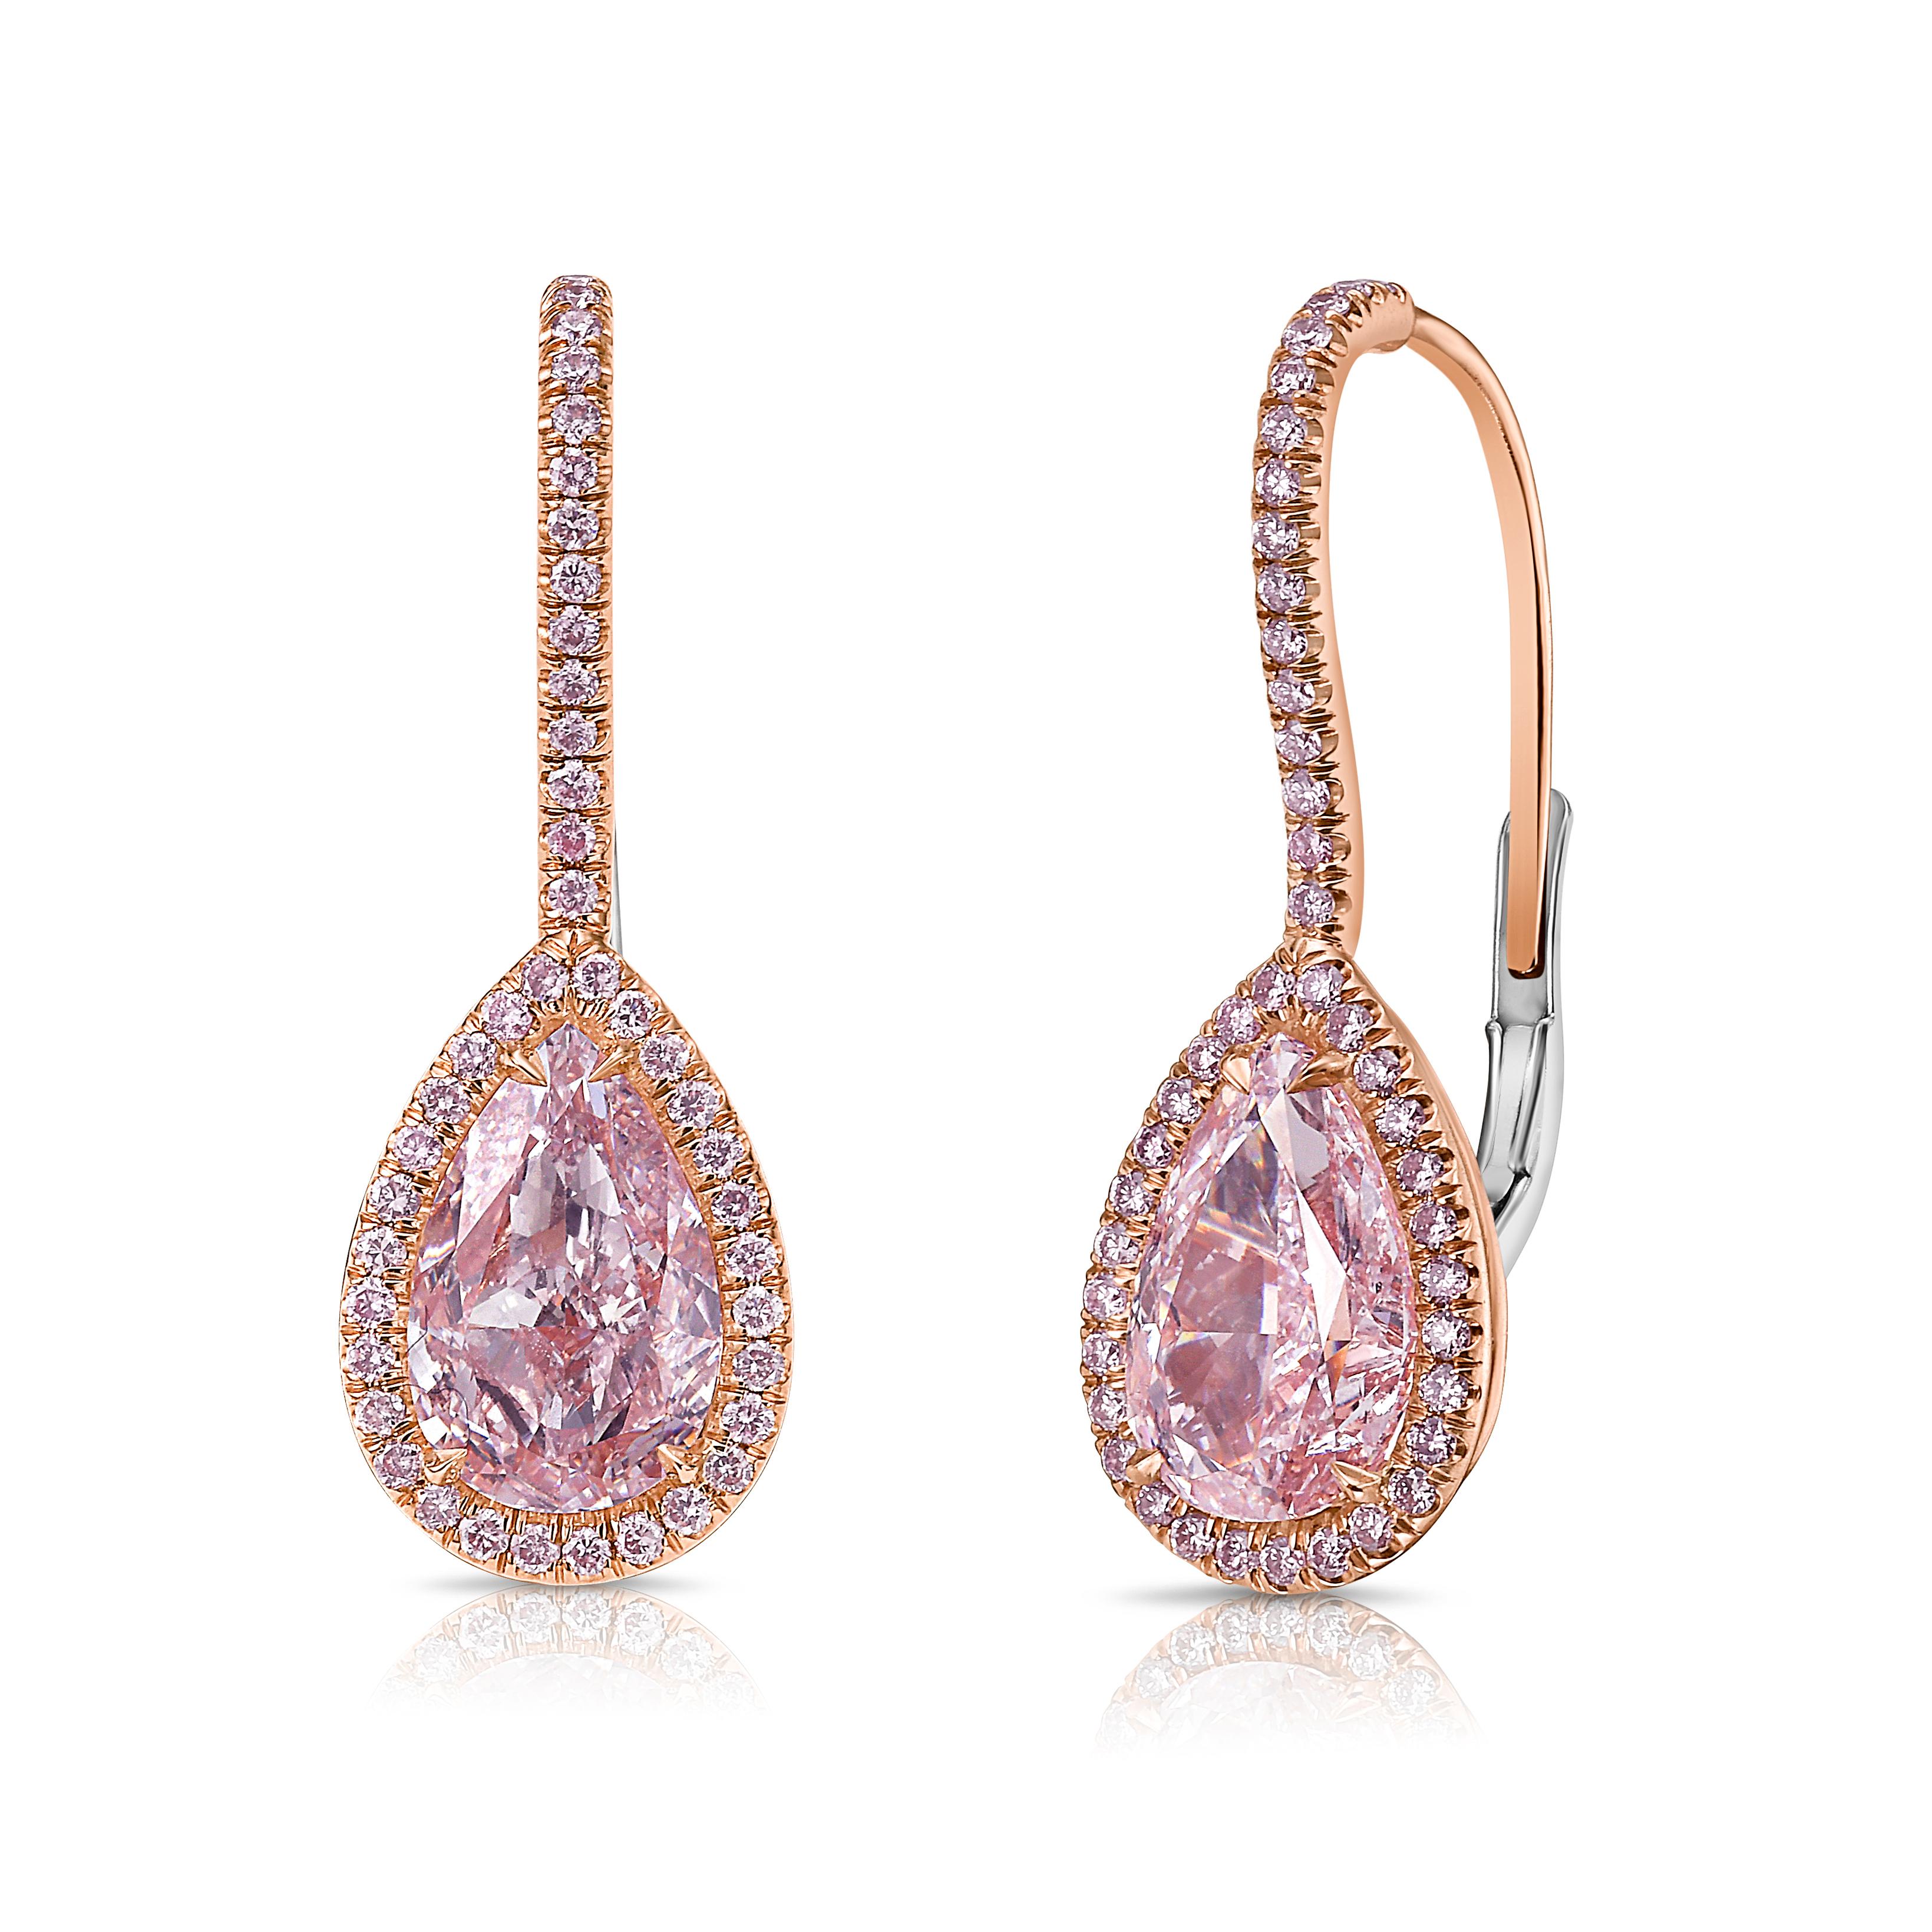 2.02 and 2.22 Carat Center Diamonds
Light Pink Pear Shapes
VS1 and VS2
0.42 Carats of Surrounding Pink Diamonds
Excellent + Very Good cutting
Set in 18k White Gold with 14k Rose Gold plating
GIA Certified Diamonds
Handmade in NYC

This piece can be